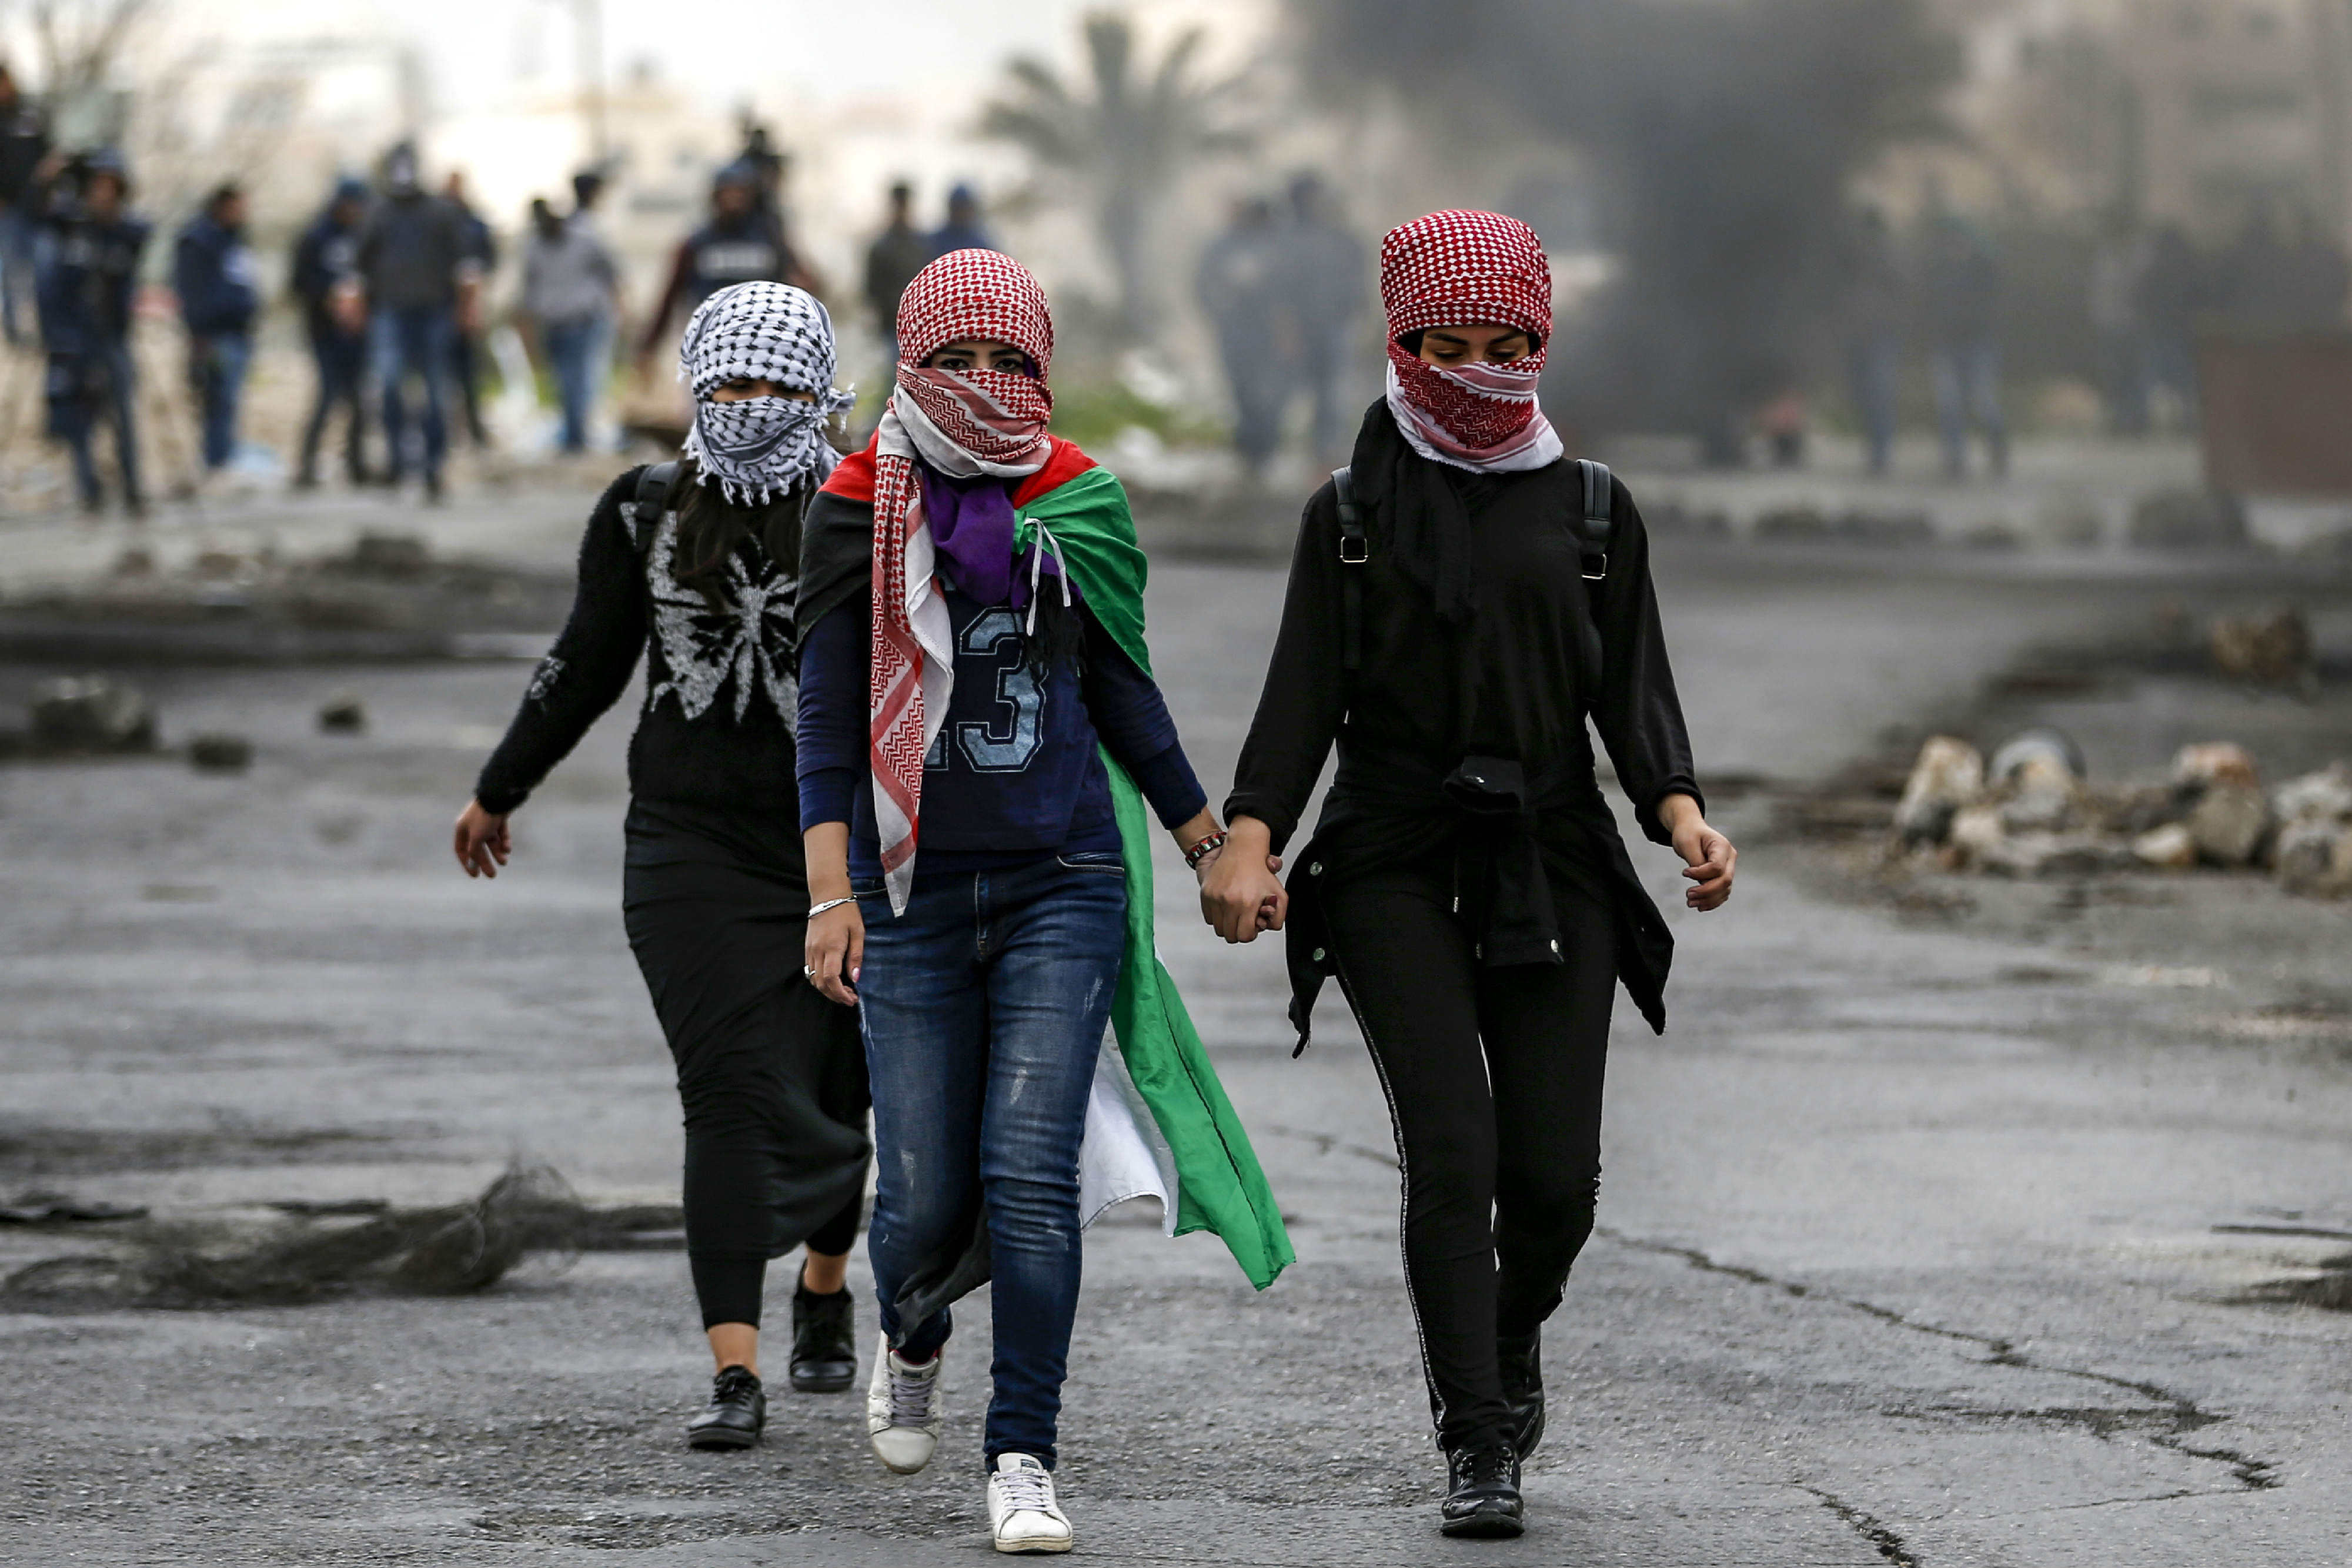 Palestinian girls with their faces covered with traditional chequered keffiyehs walk during clashes with Israeli forces following a demonstration marking Land Day in the West Bank (AFP)